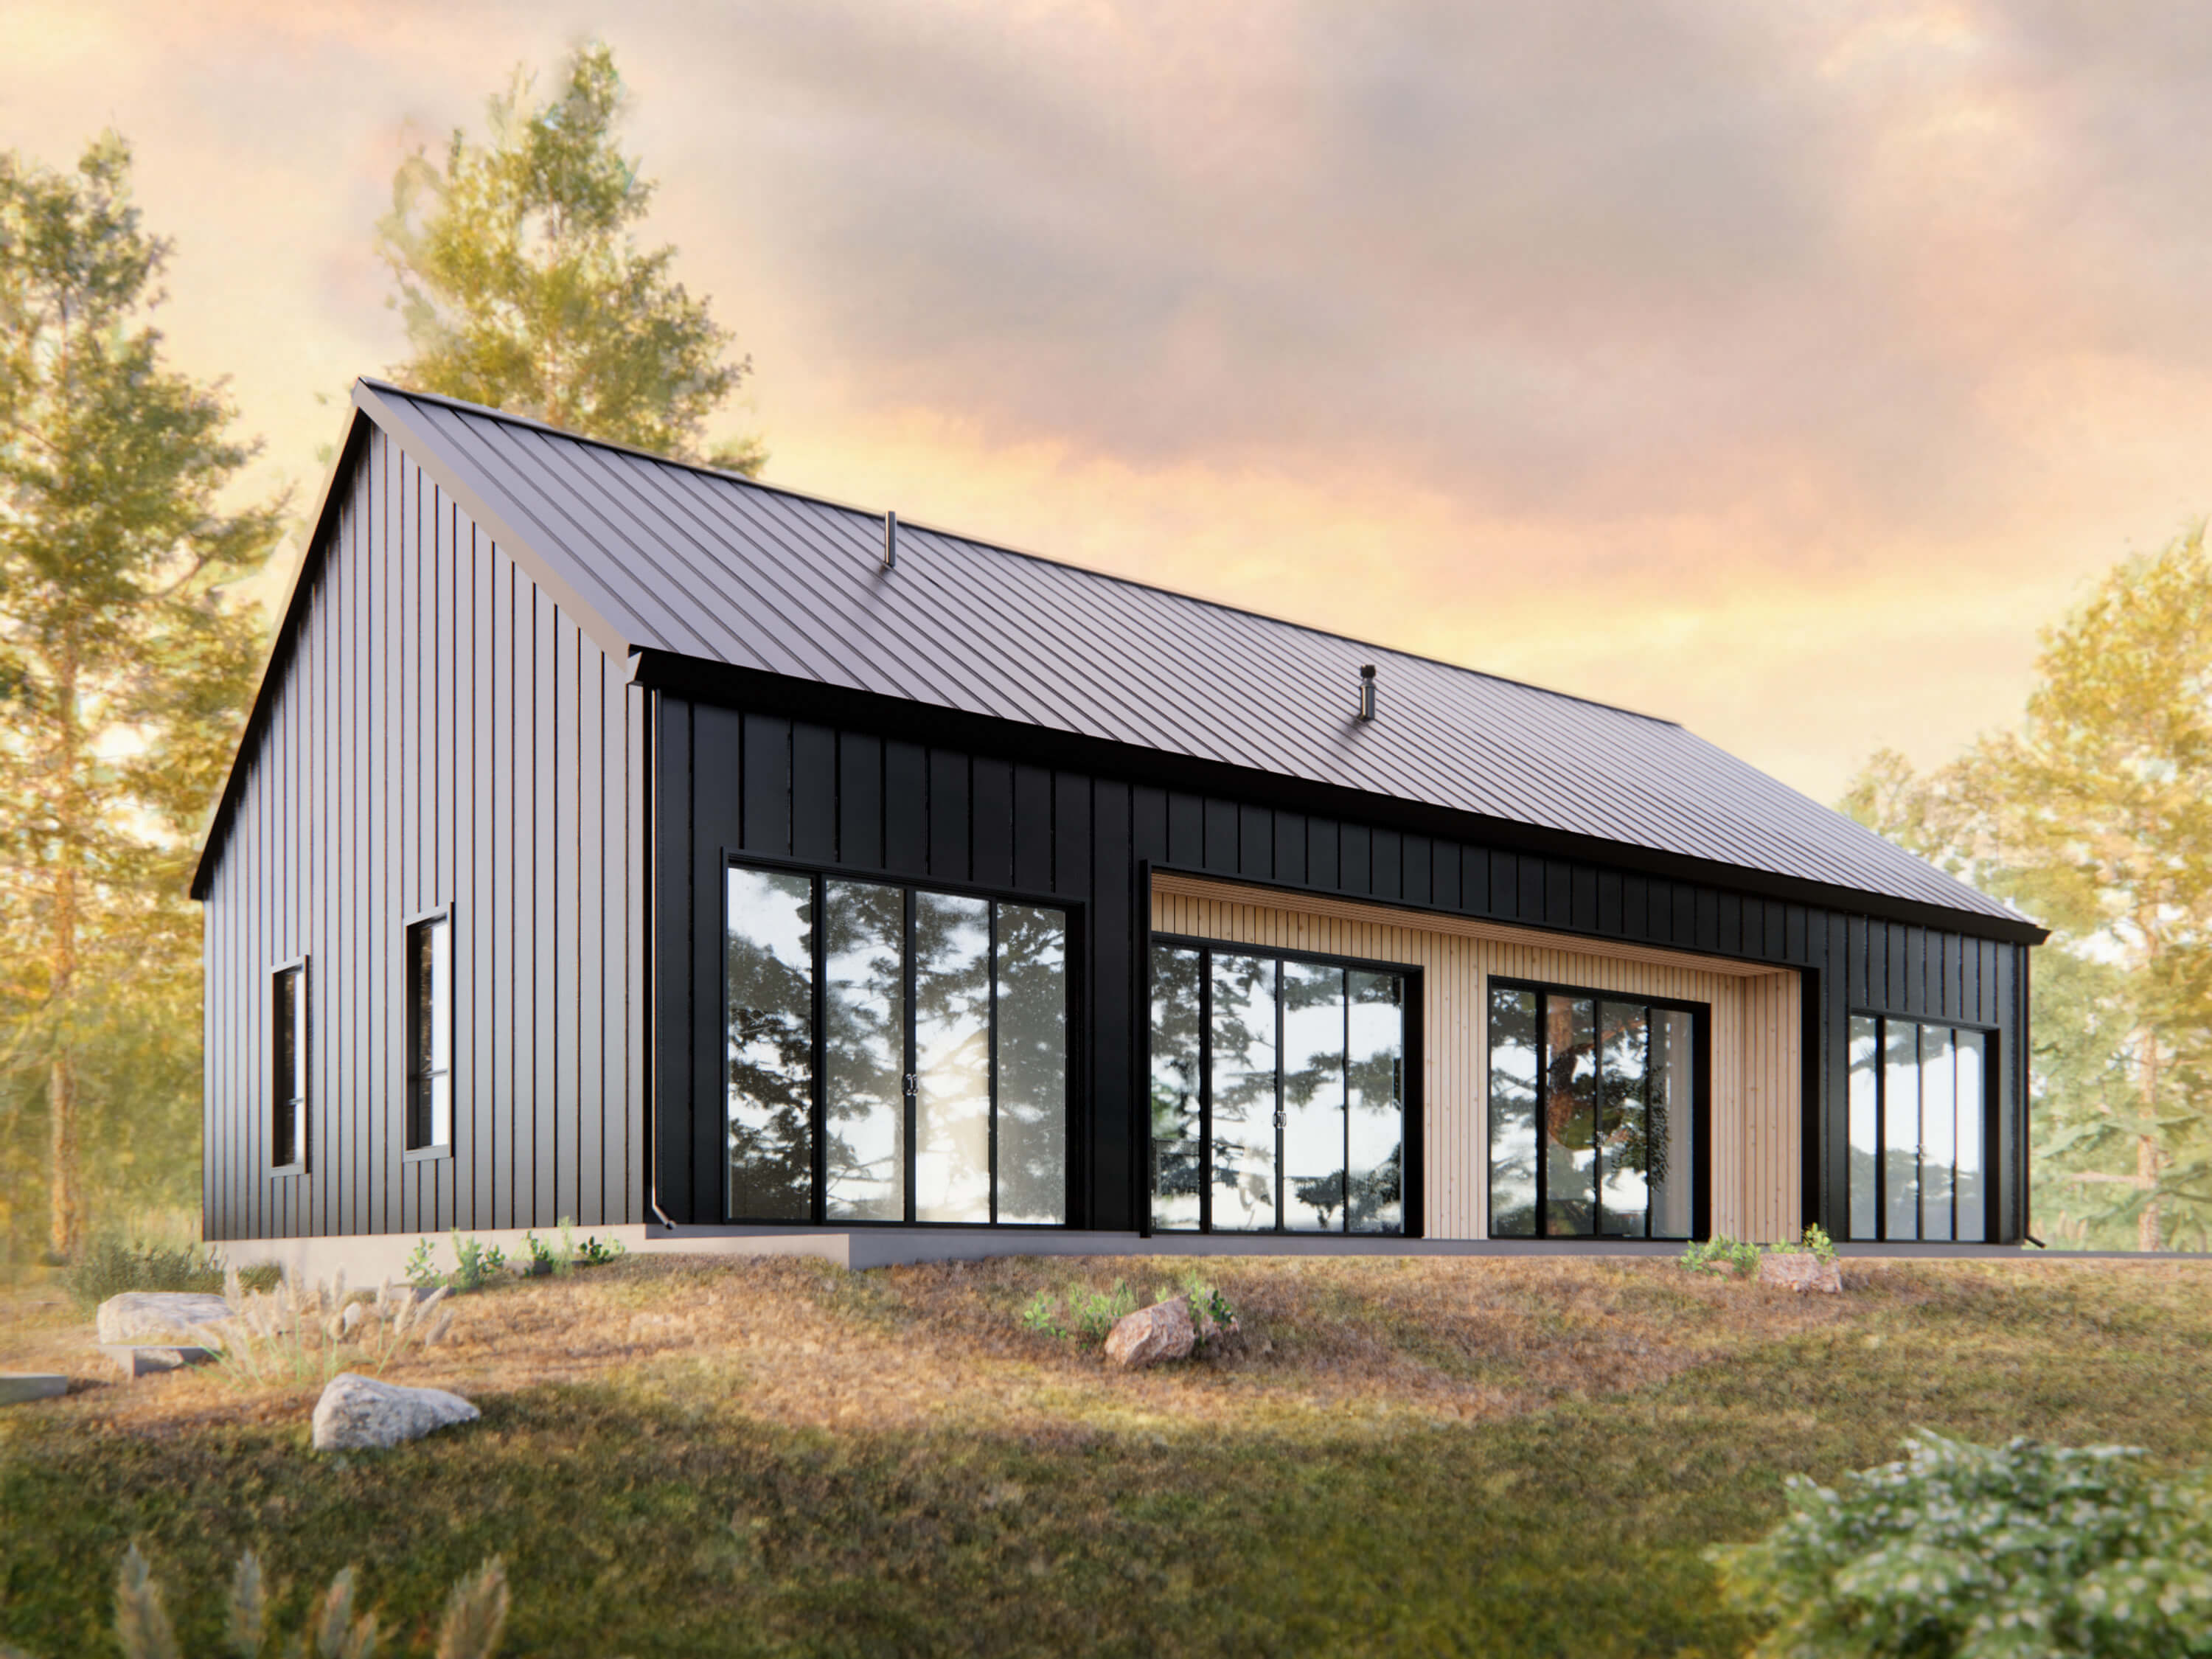 DesignwithFRANK's 2 Bedroom Modern Large Cabin. Black Standing seam metal roof and siding with 4 sliding doors